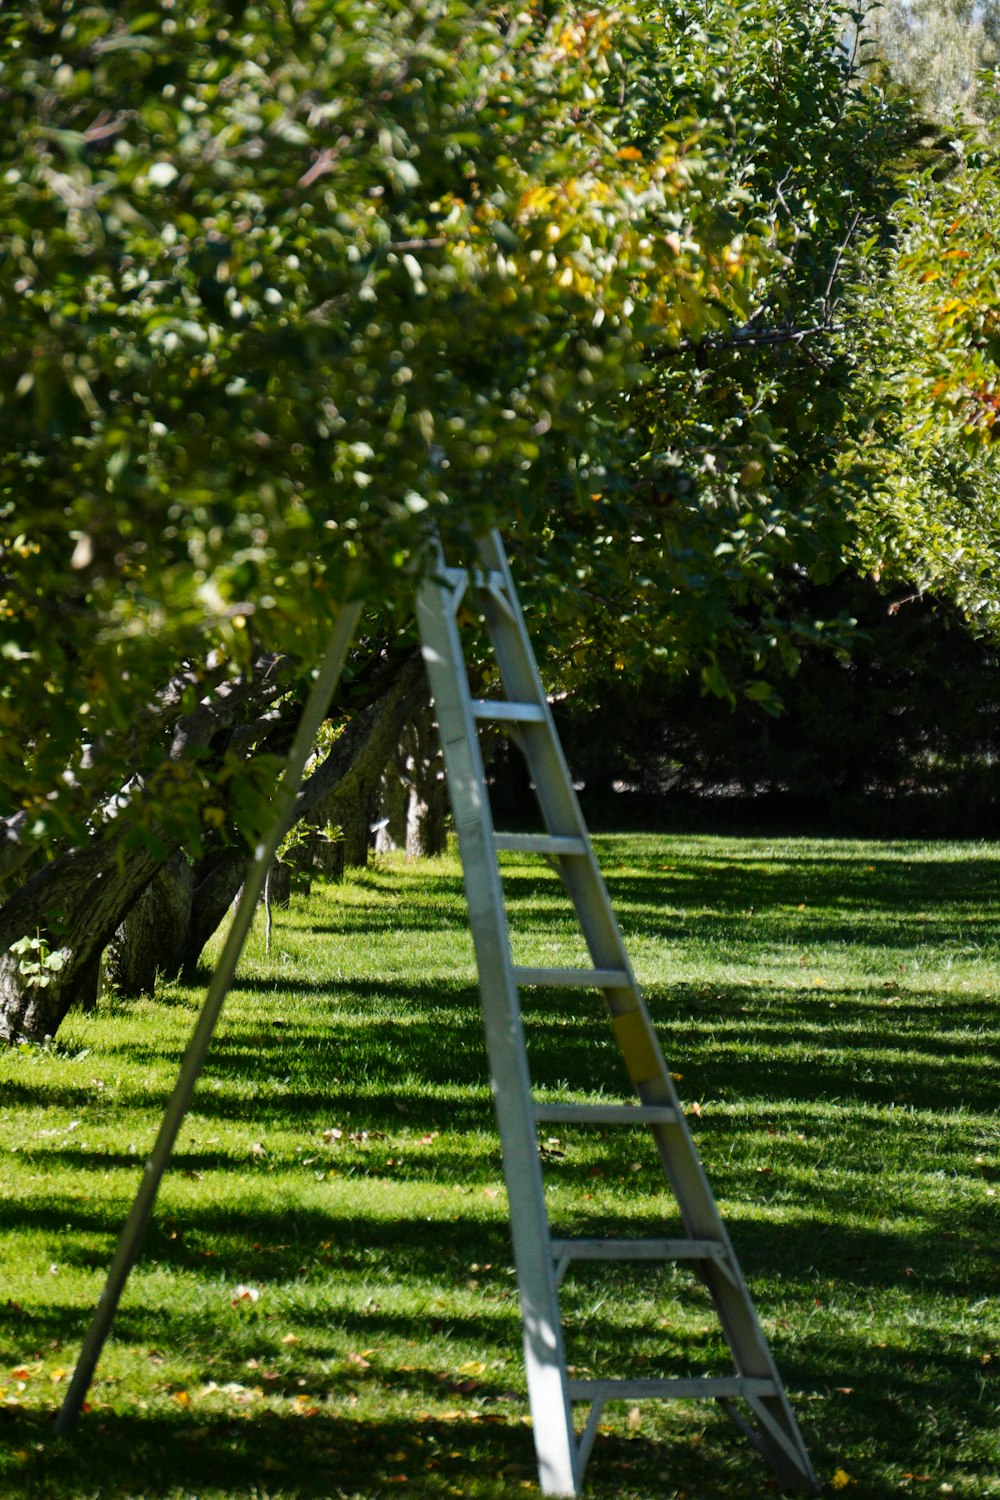 a ladder leaning against a tree in a field